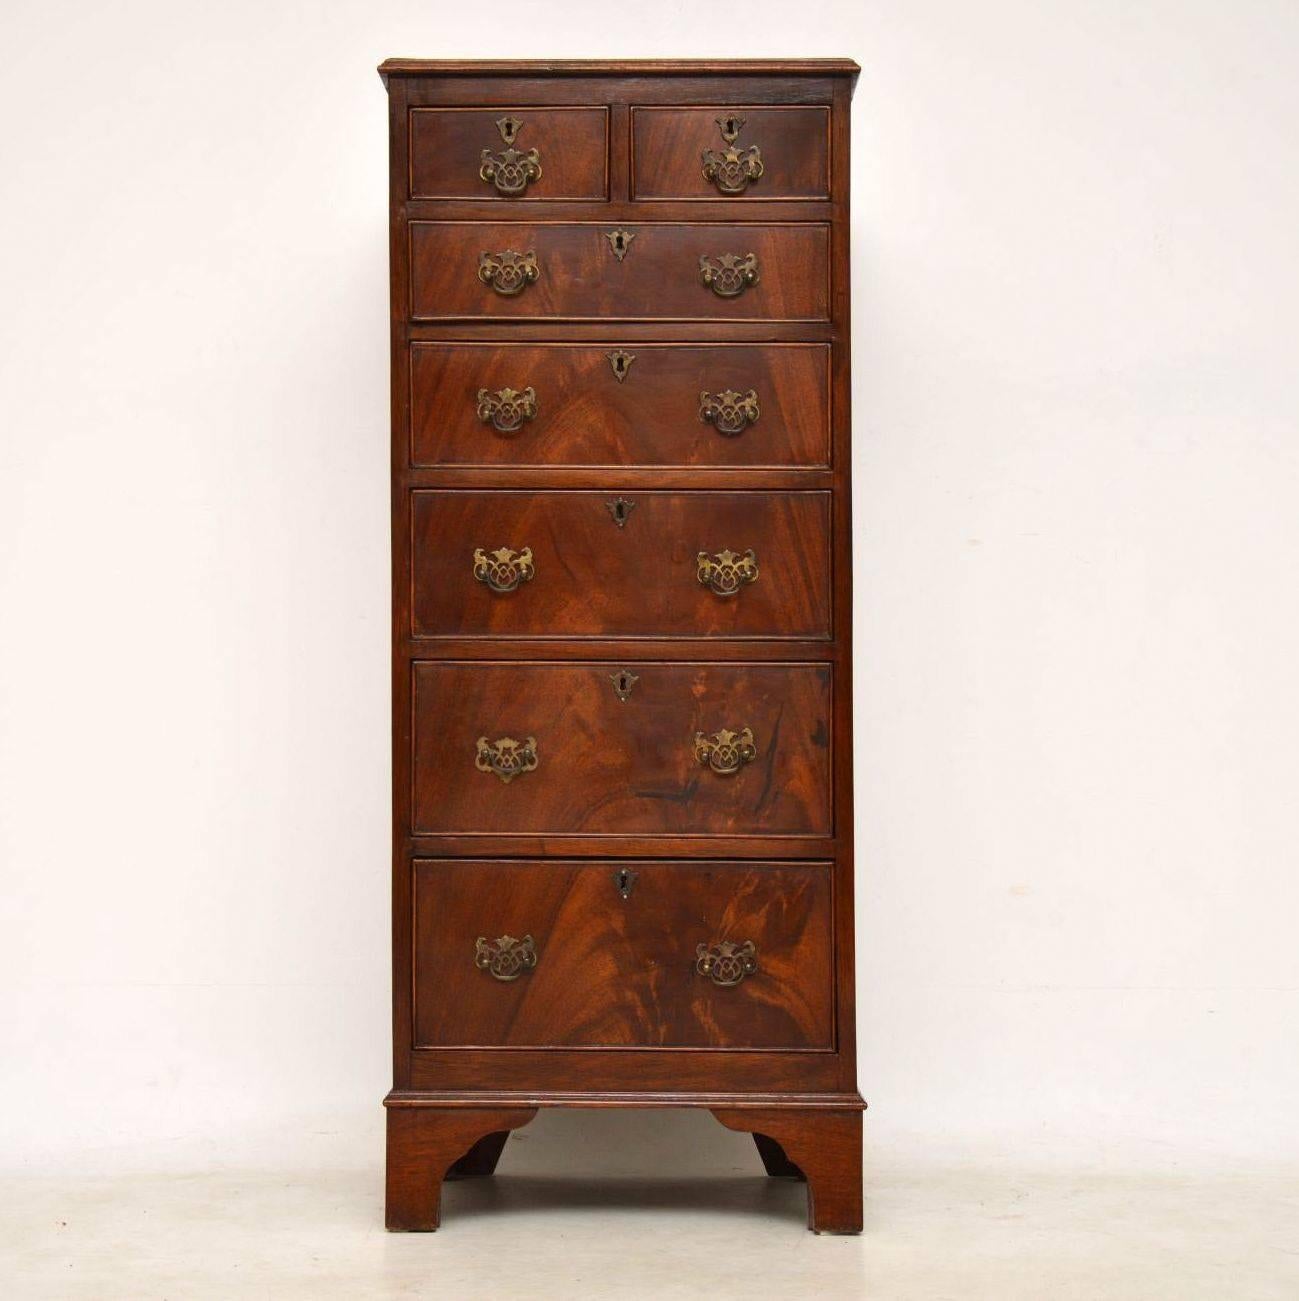 Slim antique mahogany chest of drawers on bracket feet and in good original condition. It’s very good quality, with oak lined finely dovetailed drawers, cross banded on the fronts, with original brass handles, escutcheons and locks. The drawers have